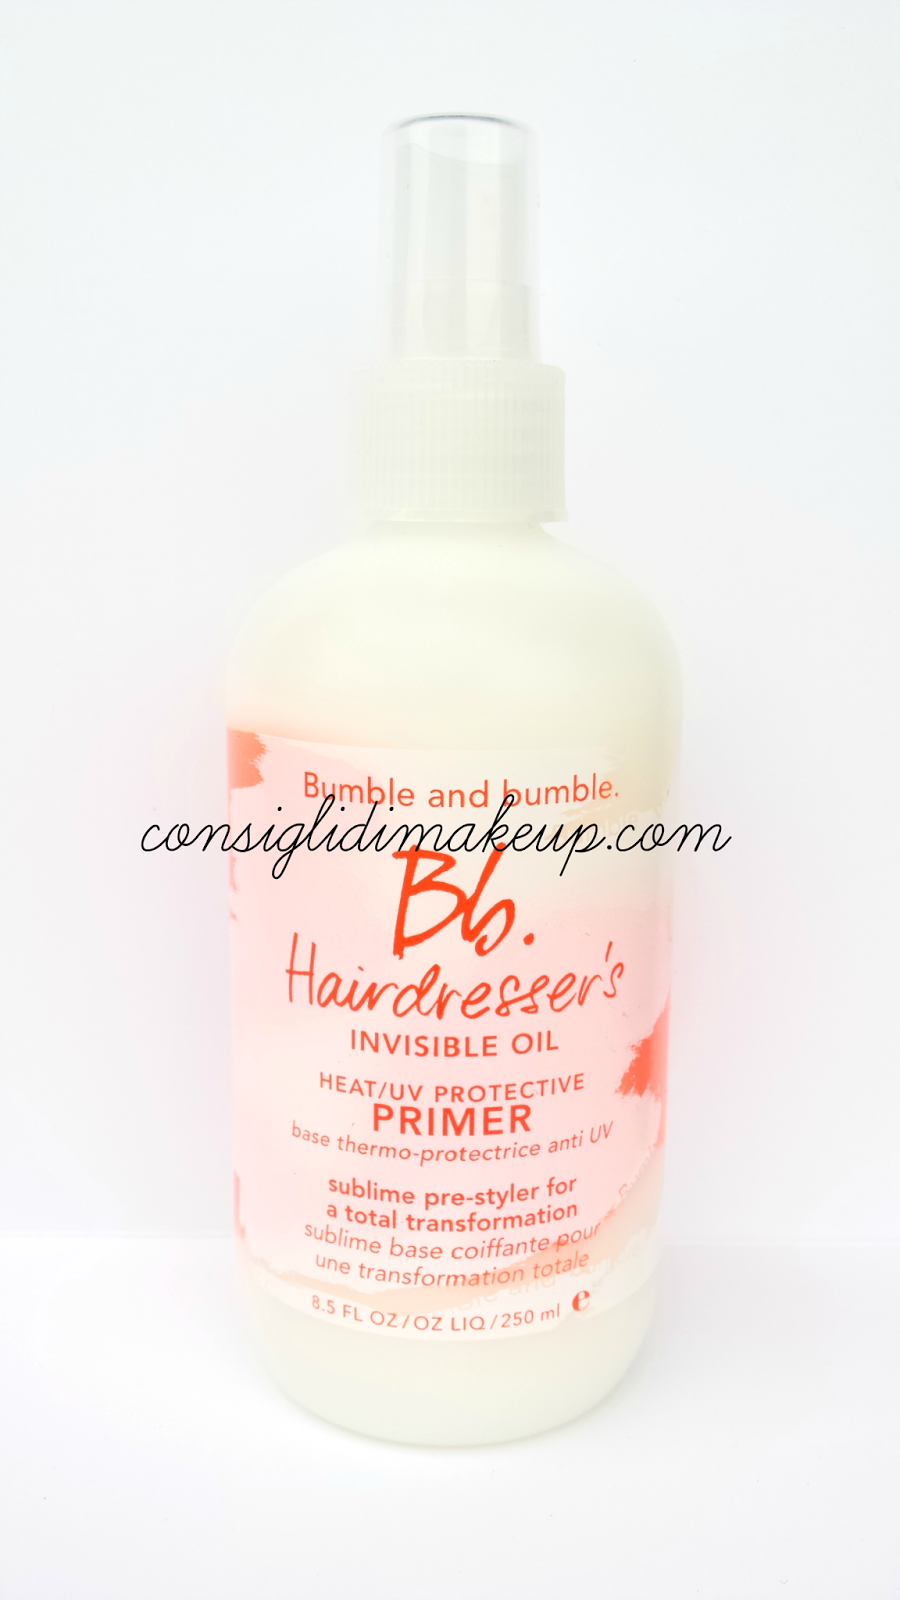 hairdresser's invisibile oil bumble and bumble